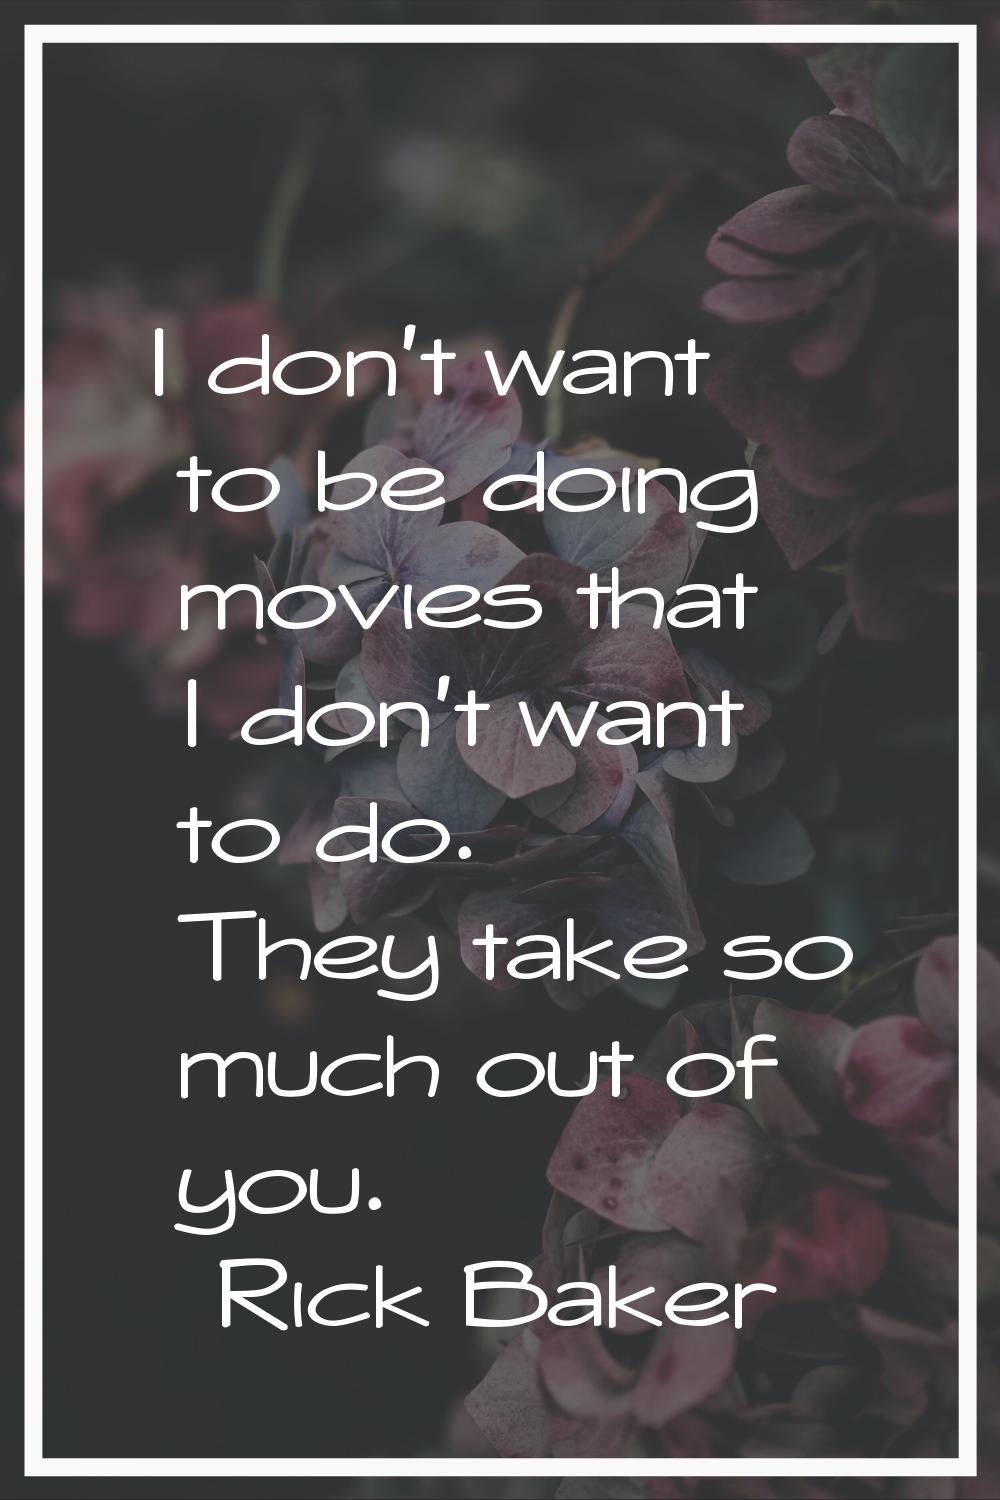 I don't want to be doing movies that I don't want to do. They take so much out of you.